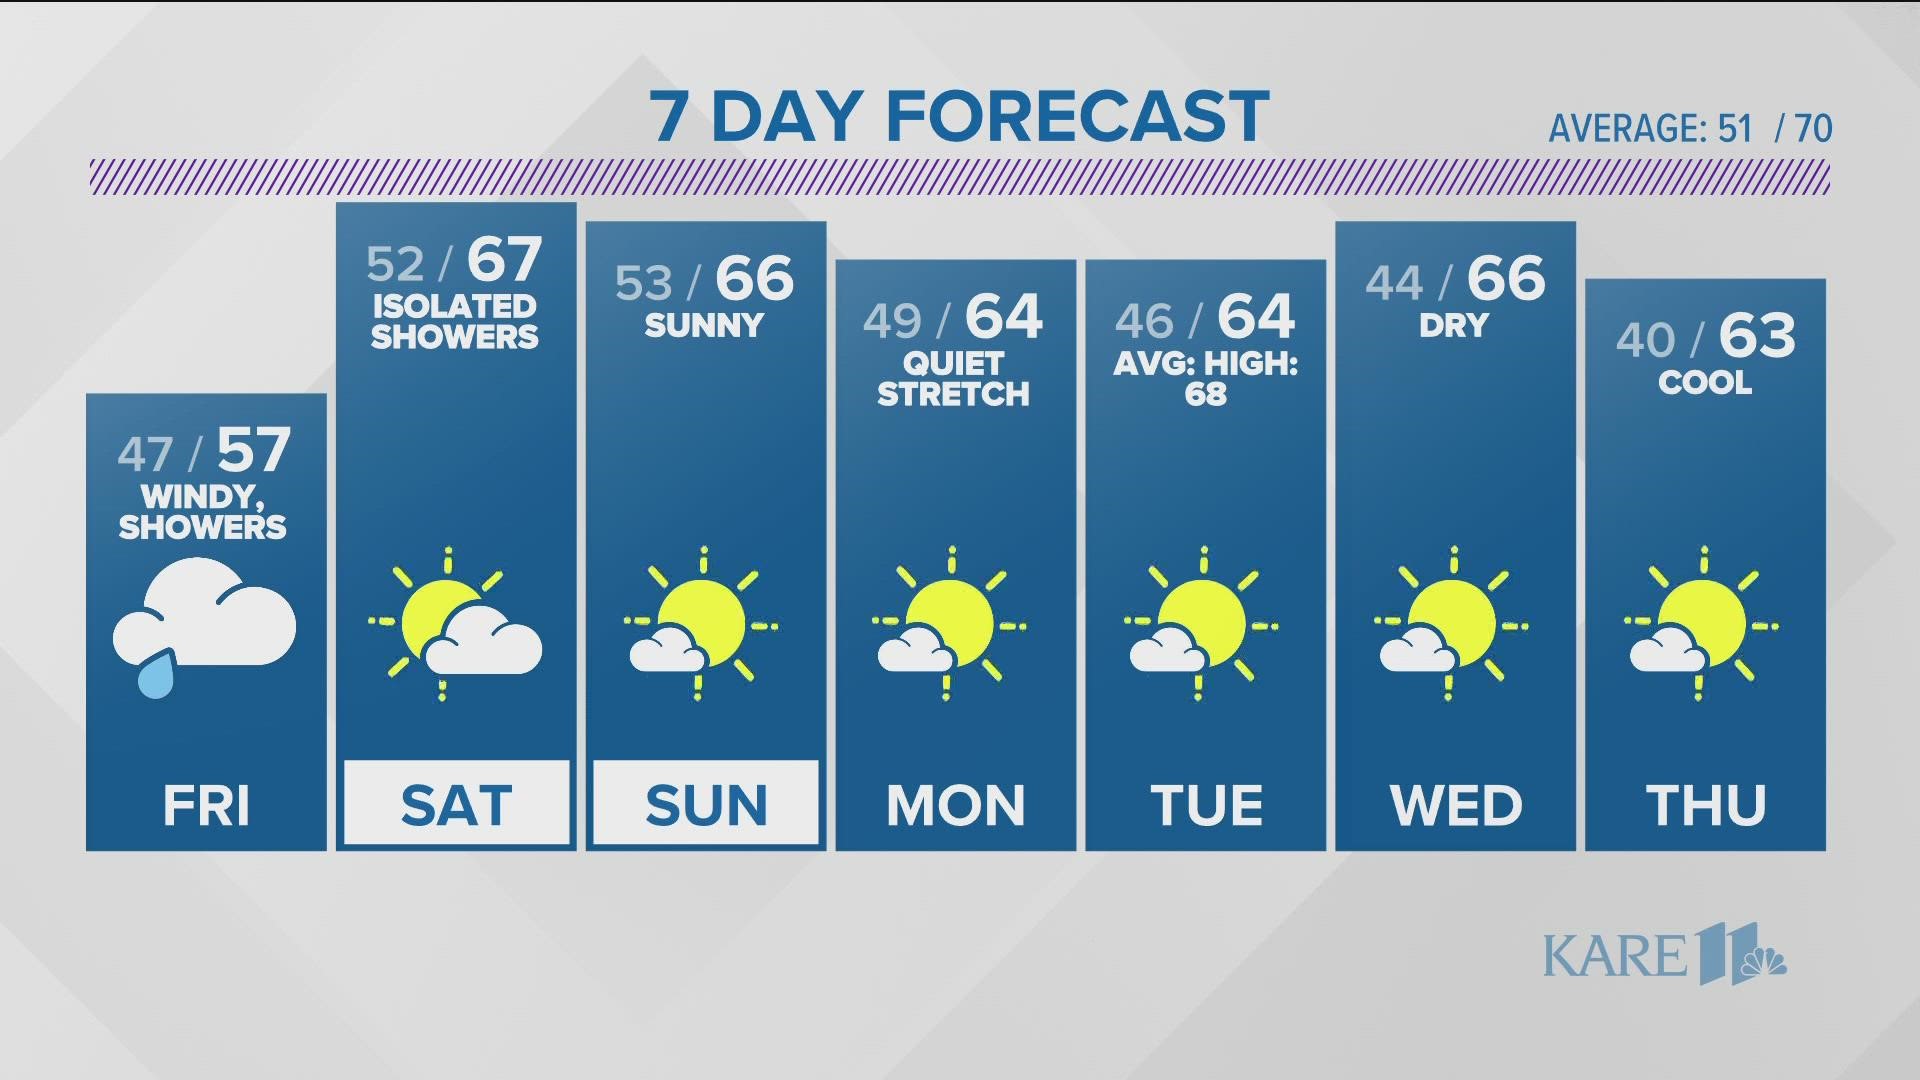 Sun returns on Saturday and dry weather lasts through early next week.